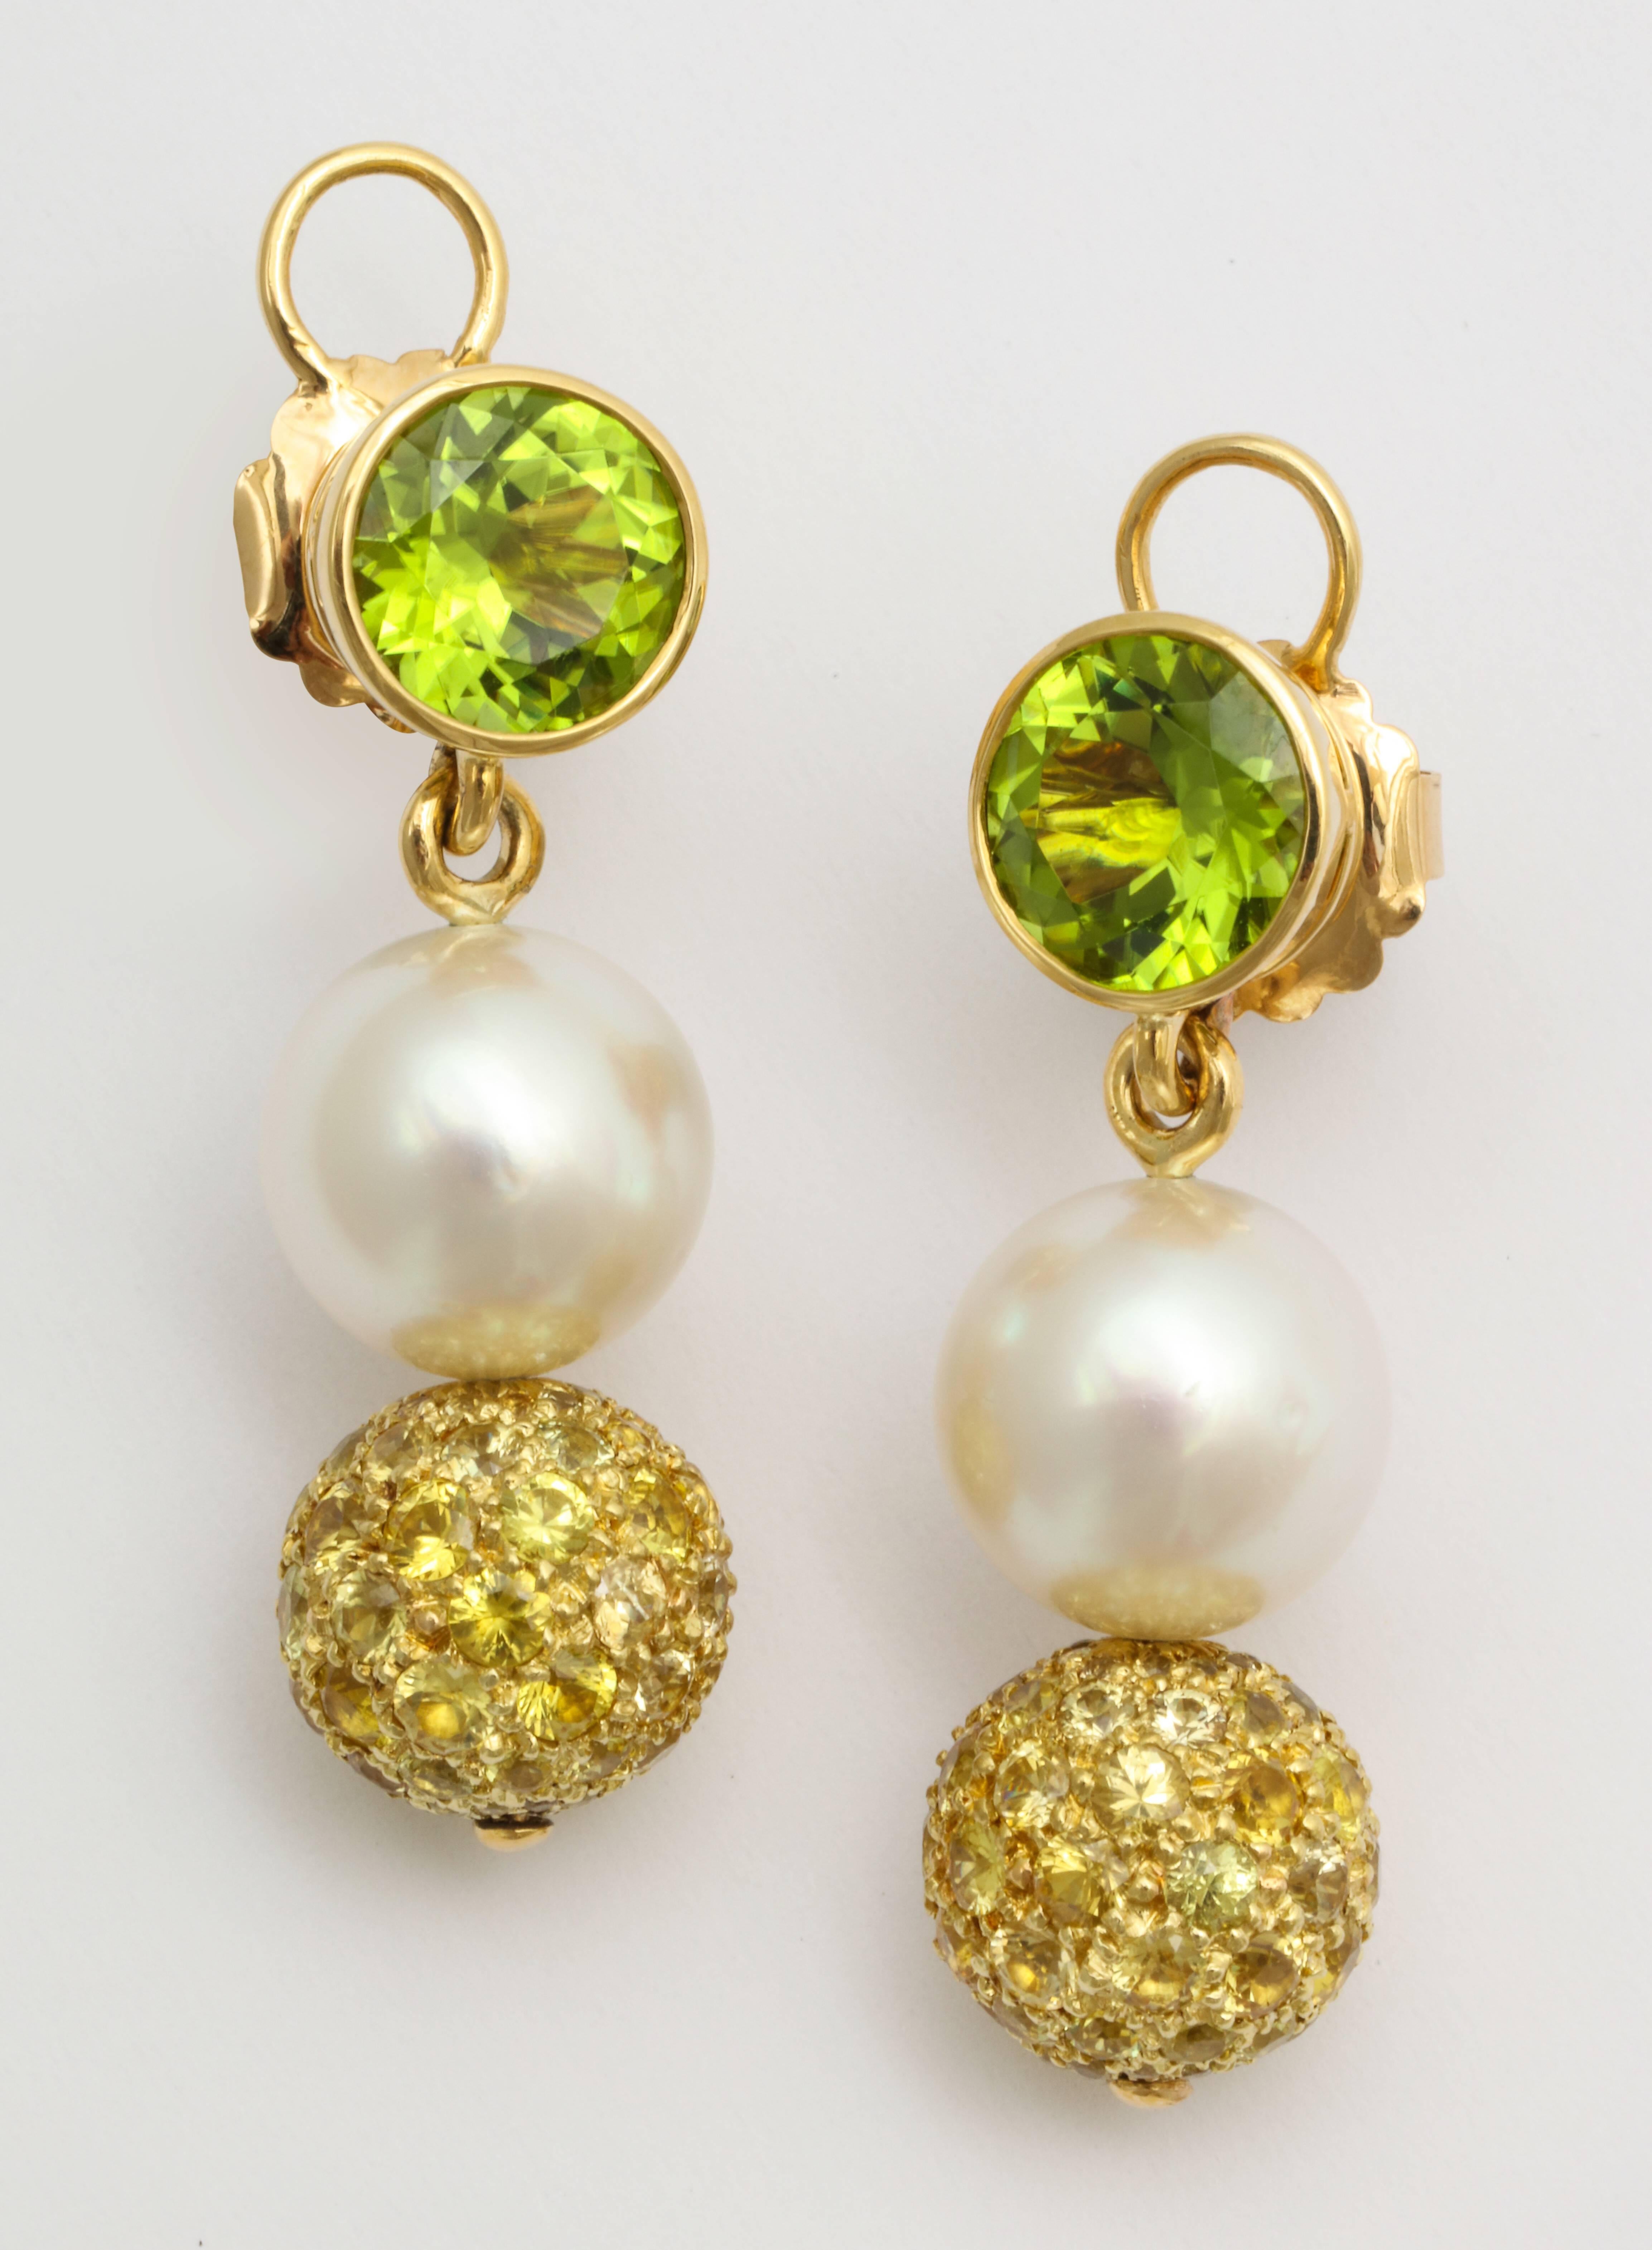 A pair of 18 karat yellow gold earrings with South Sea pearls, yellow sapphires, and peridot. The South Sea pearls measure at 11.5 and 11.6mm. The round brilliant cut peridots have a total weight of 5.32 carats. The pavé set yellow sapphires have a